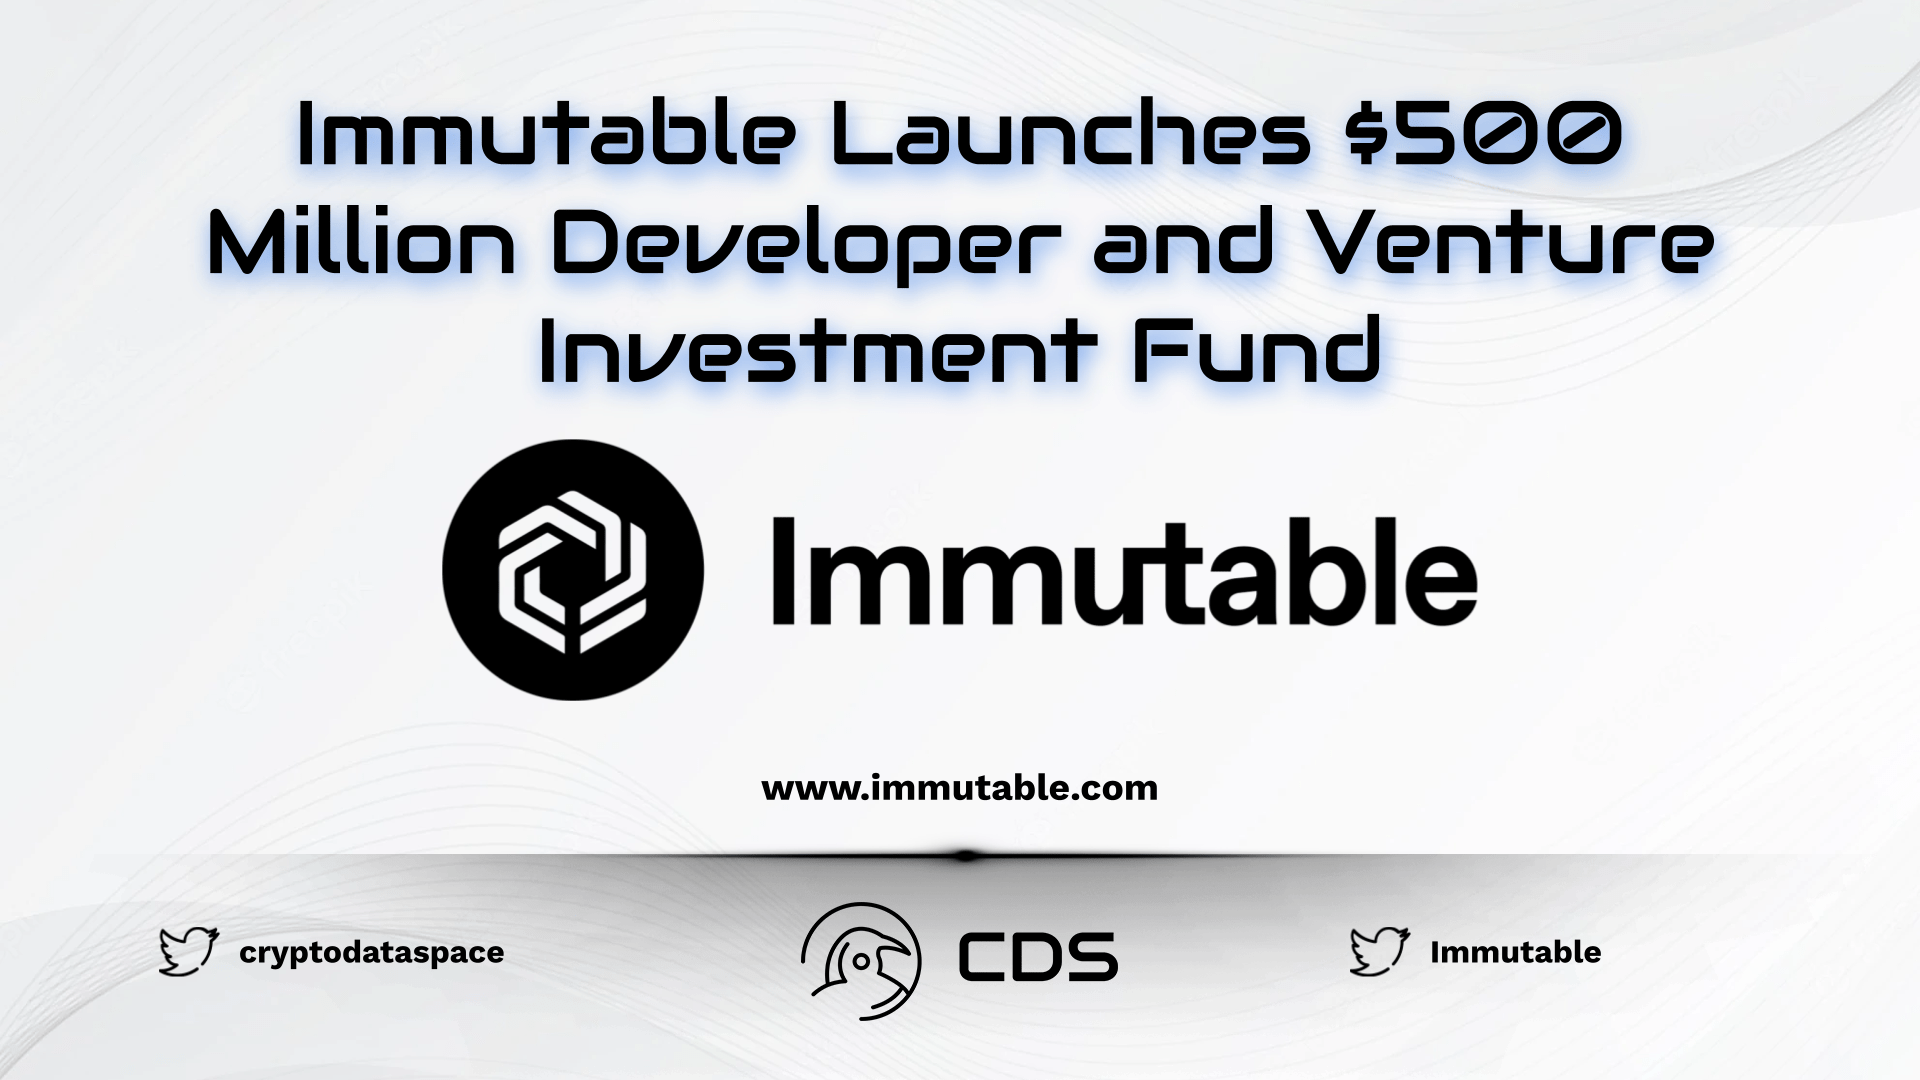 Immutable Launches $500 Million Developer and Venture Investment Fund